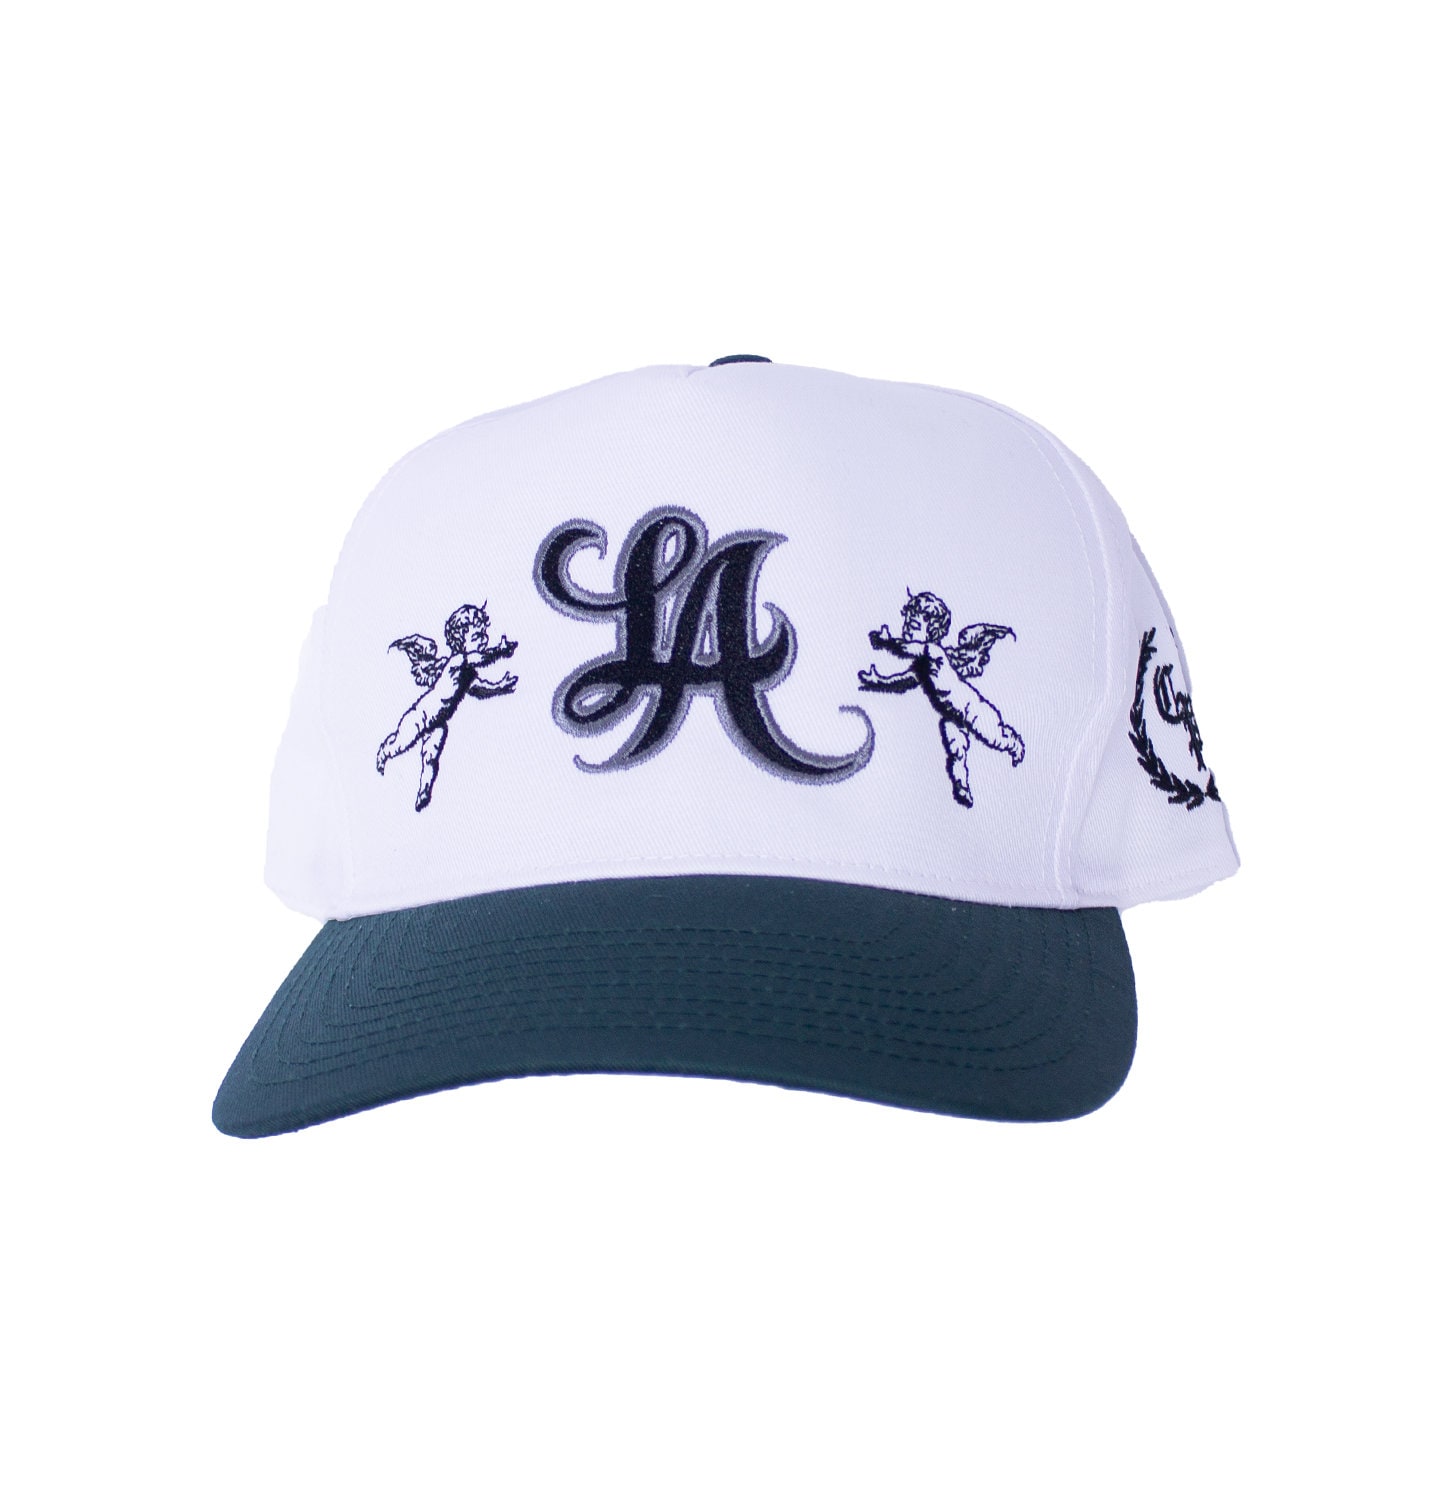 Los Angeles Lakers Hat Cap Fitted Mens 7 12 Black India